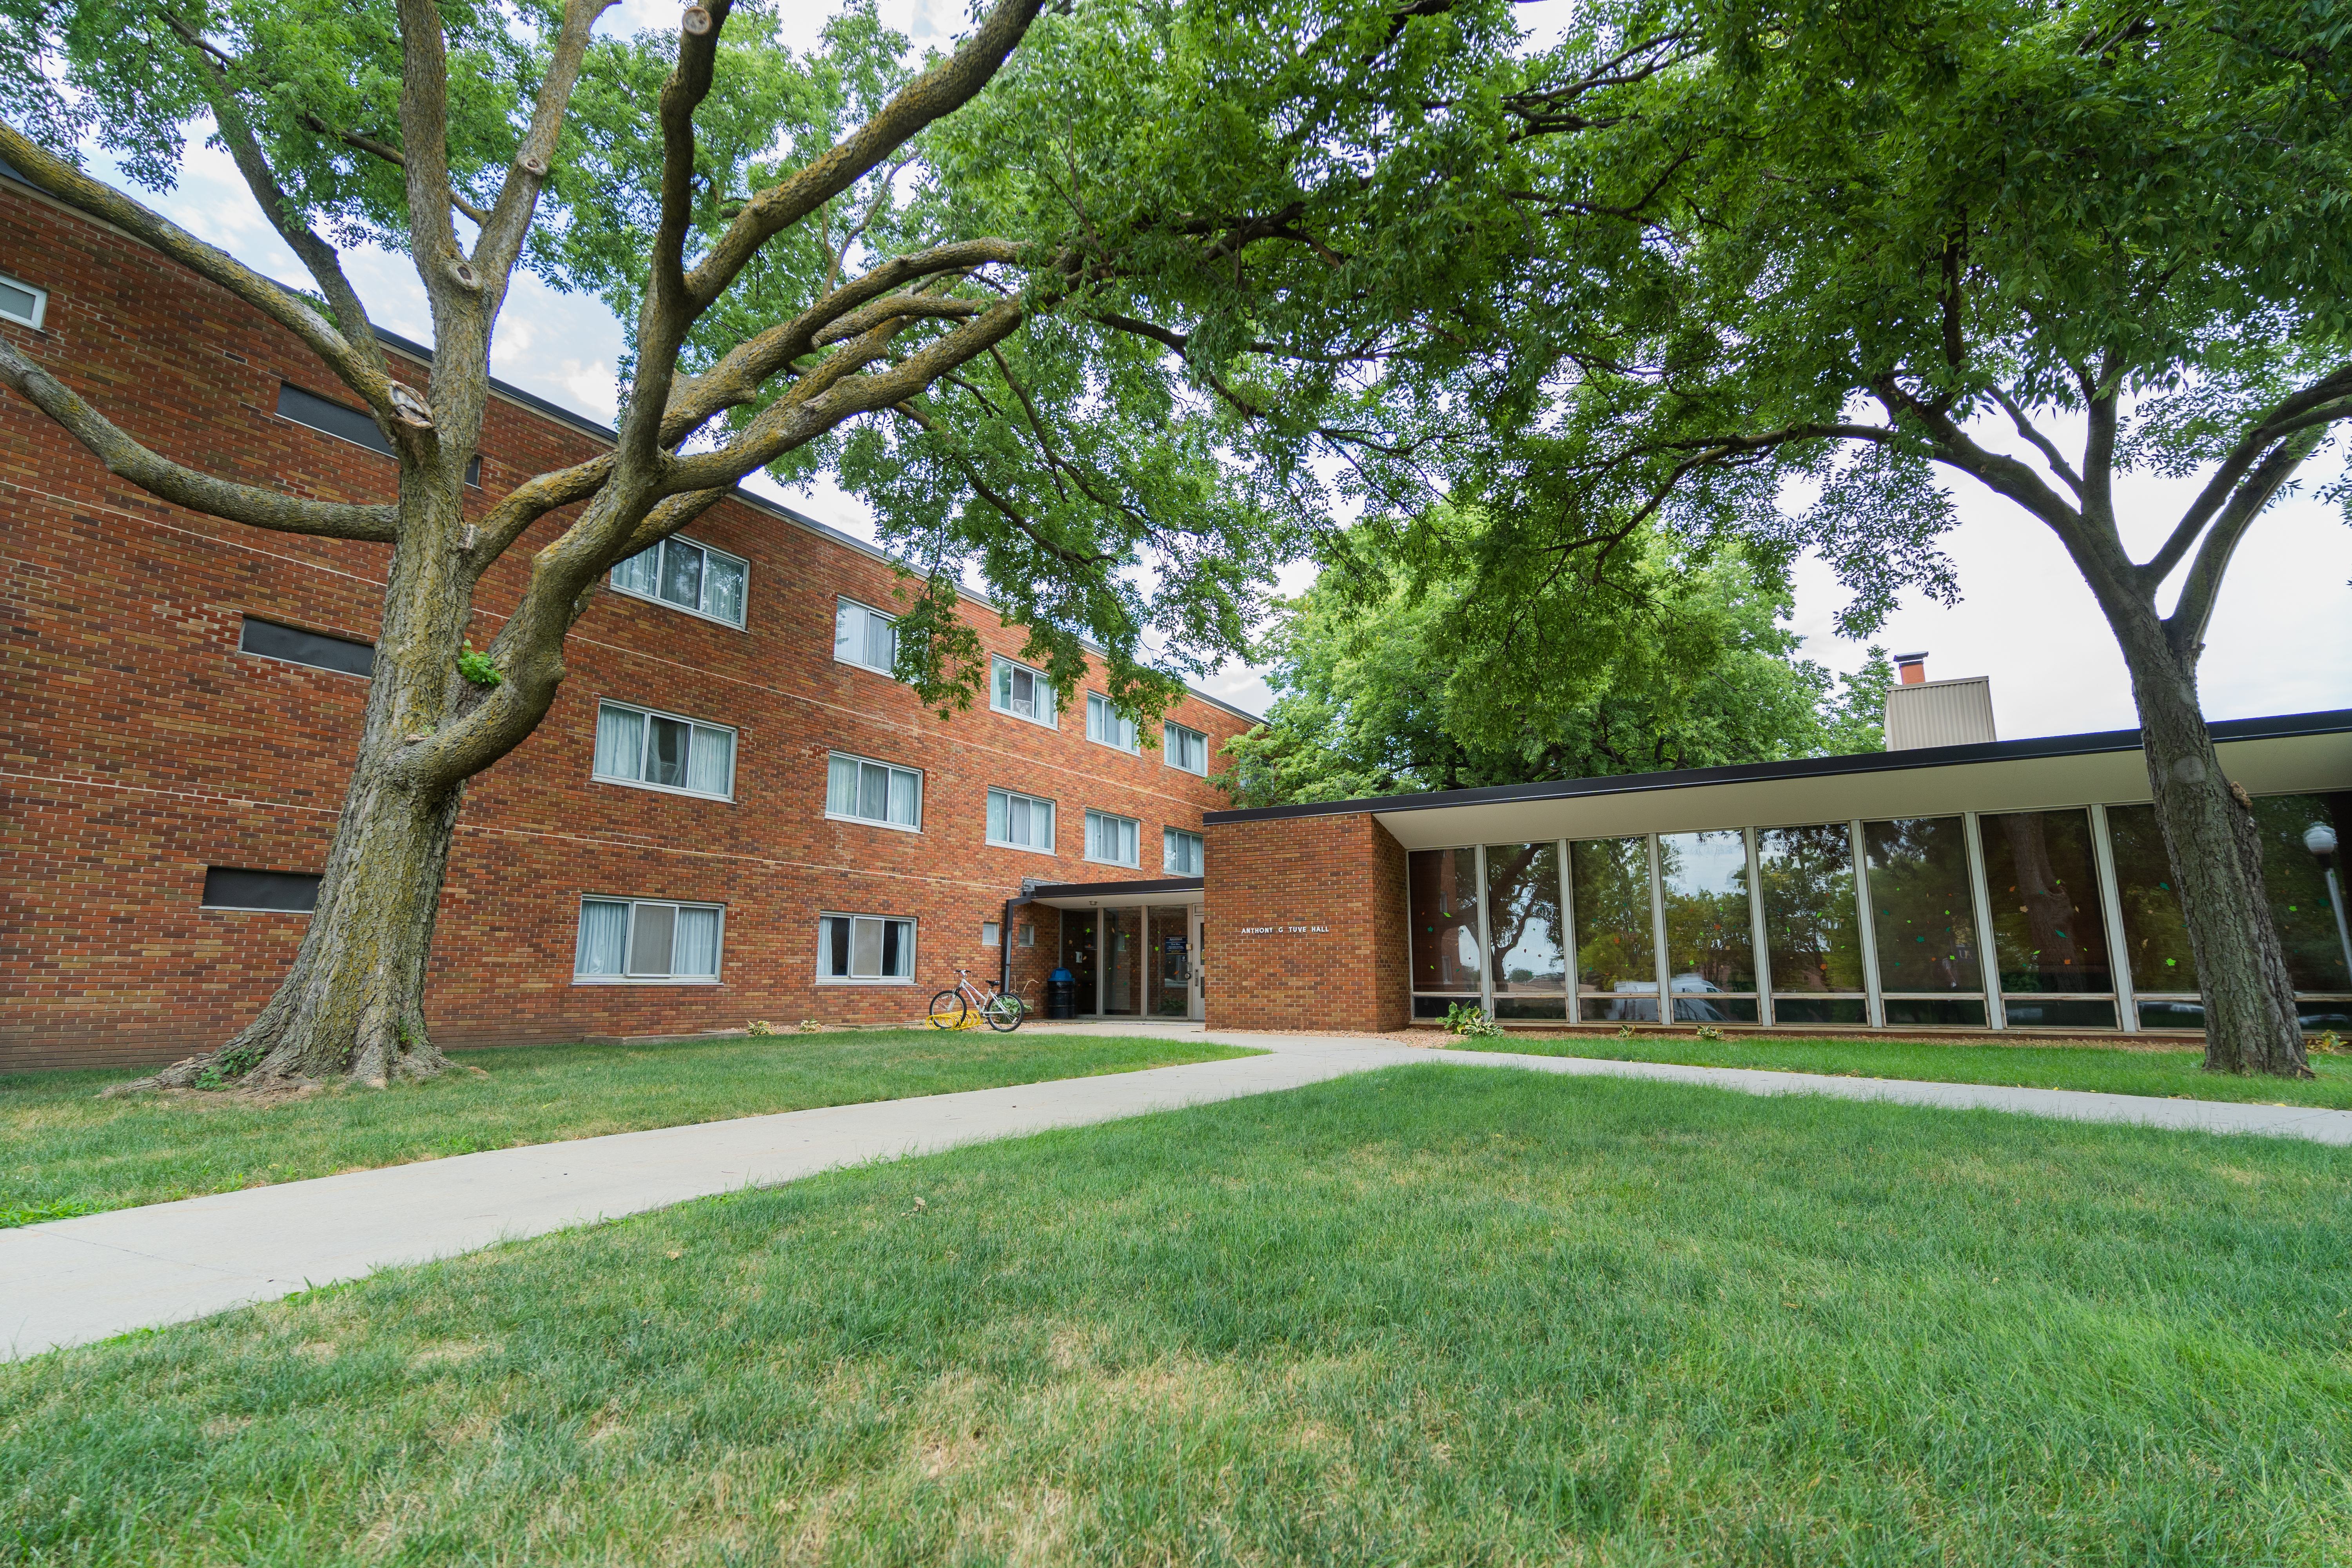 Exterior photo of Tuve Hall on campus